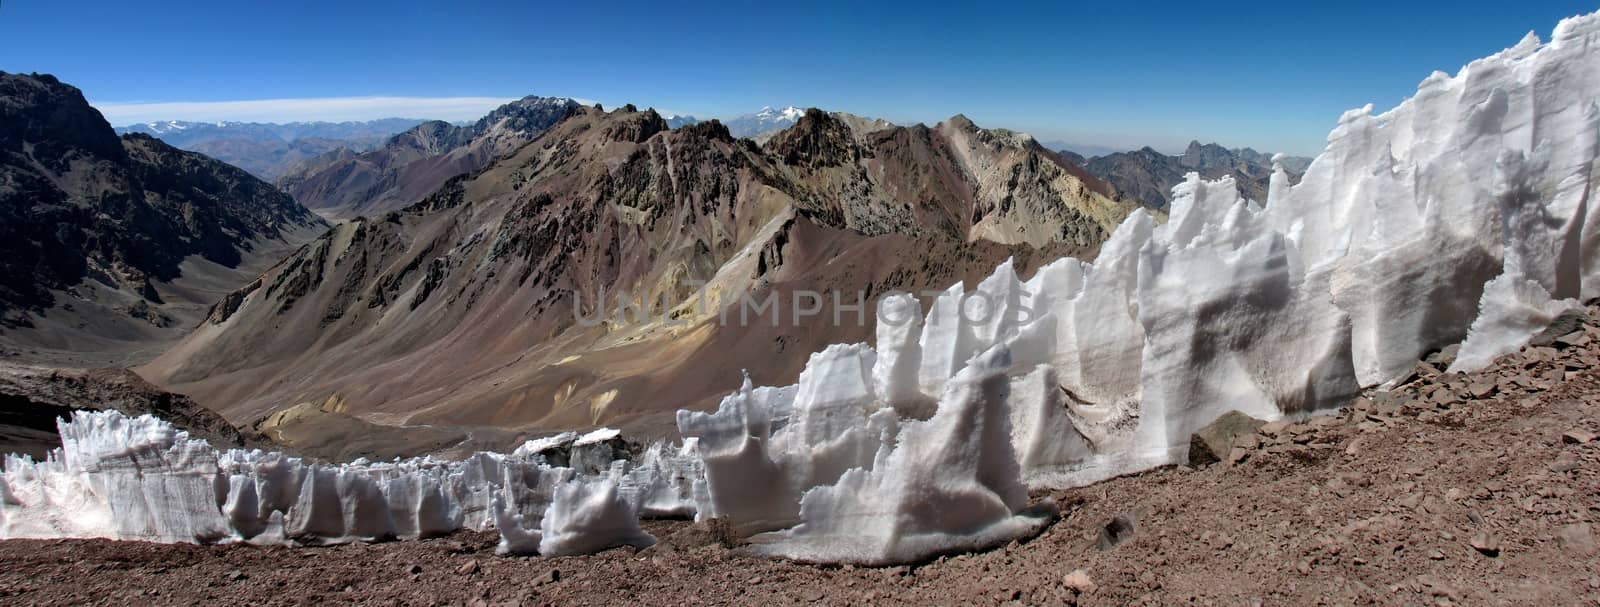 Beautiful mountain landscape in the Andes, Argentina, South America